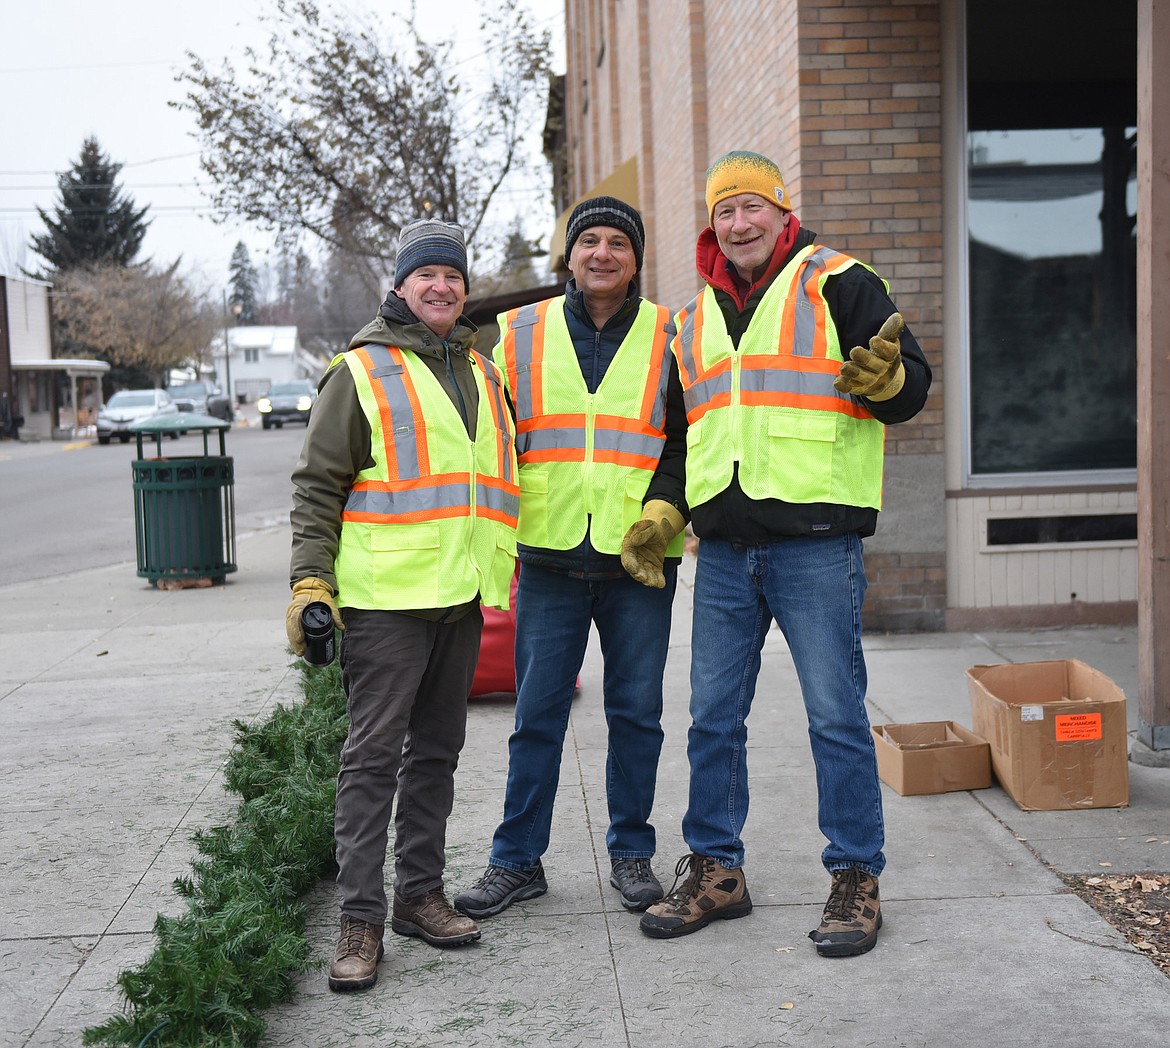 Volunteers help with the decorations in downtown Whitefish on Sunday morning. (Julie Engler/Whitefish Pilot)